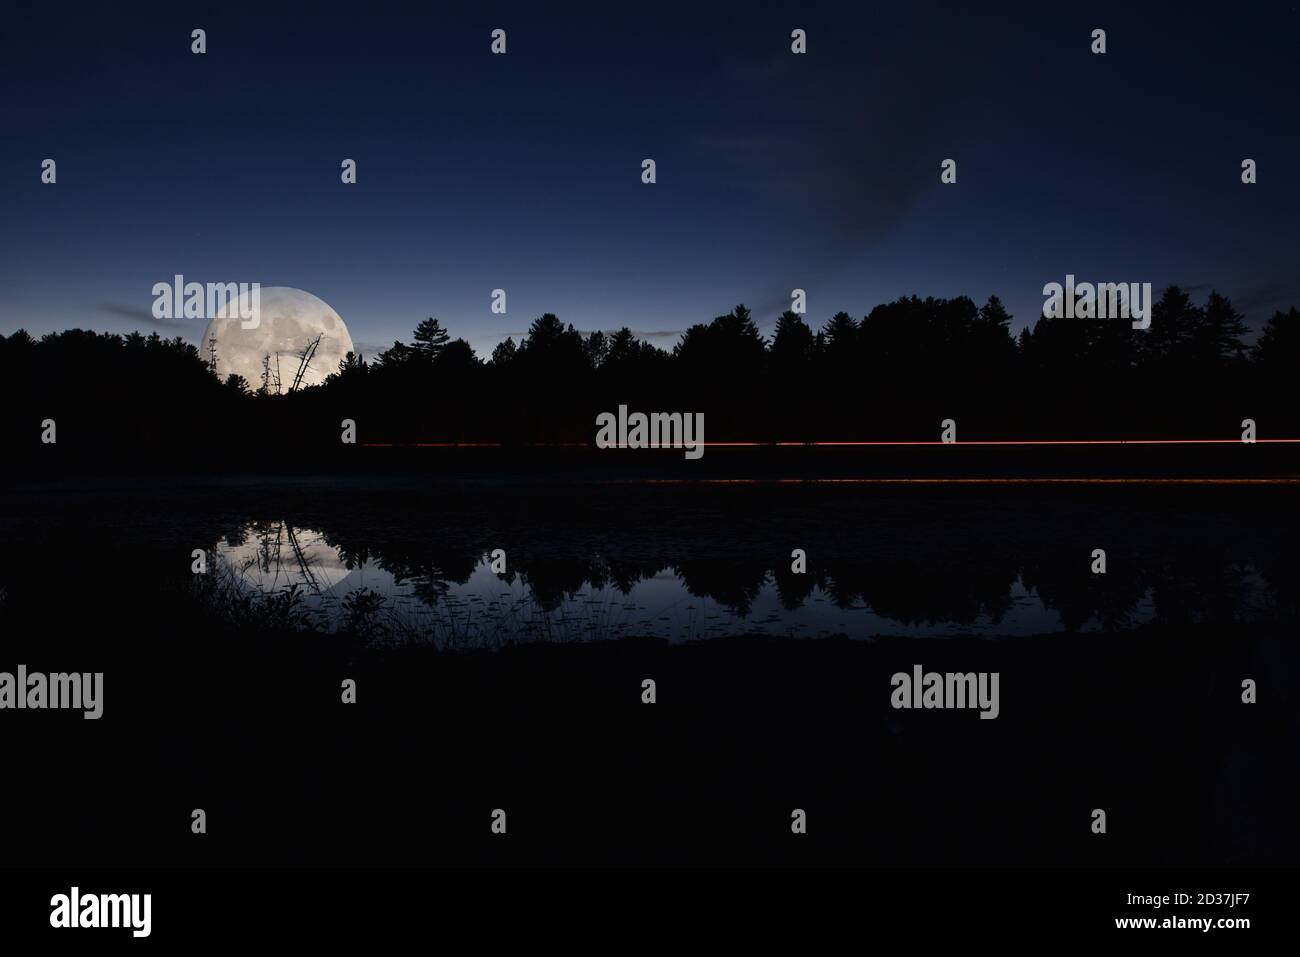 Reflection of light trails from a vehicle on a small lake at night, set against trees and night sky. Stock Photo